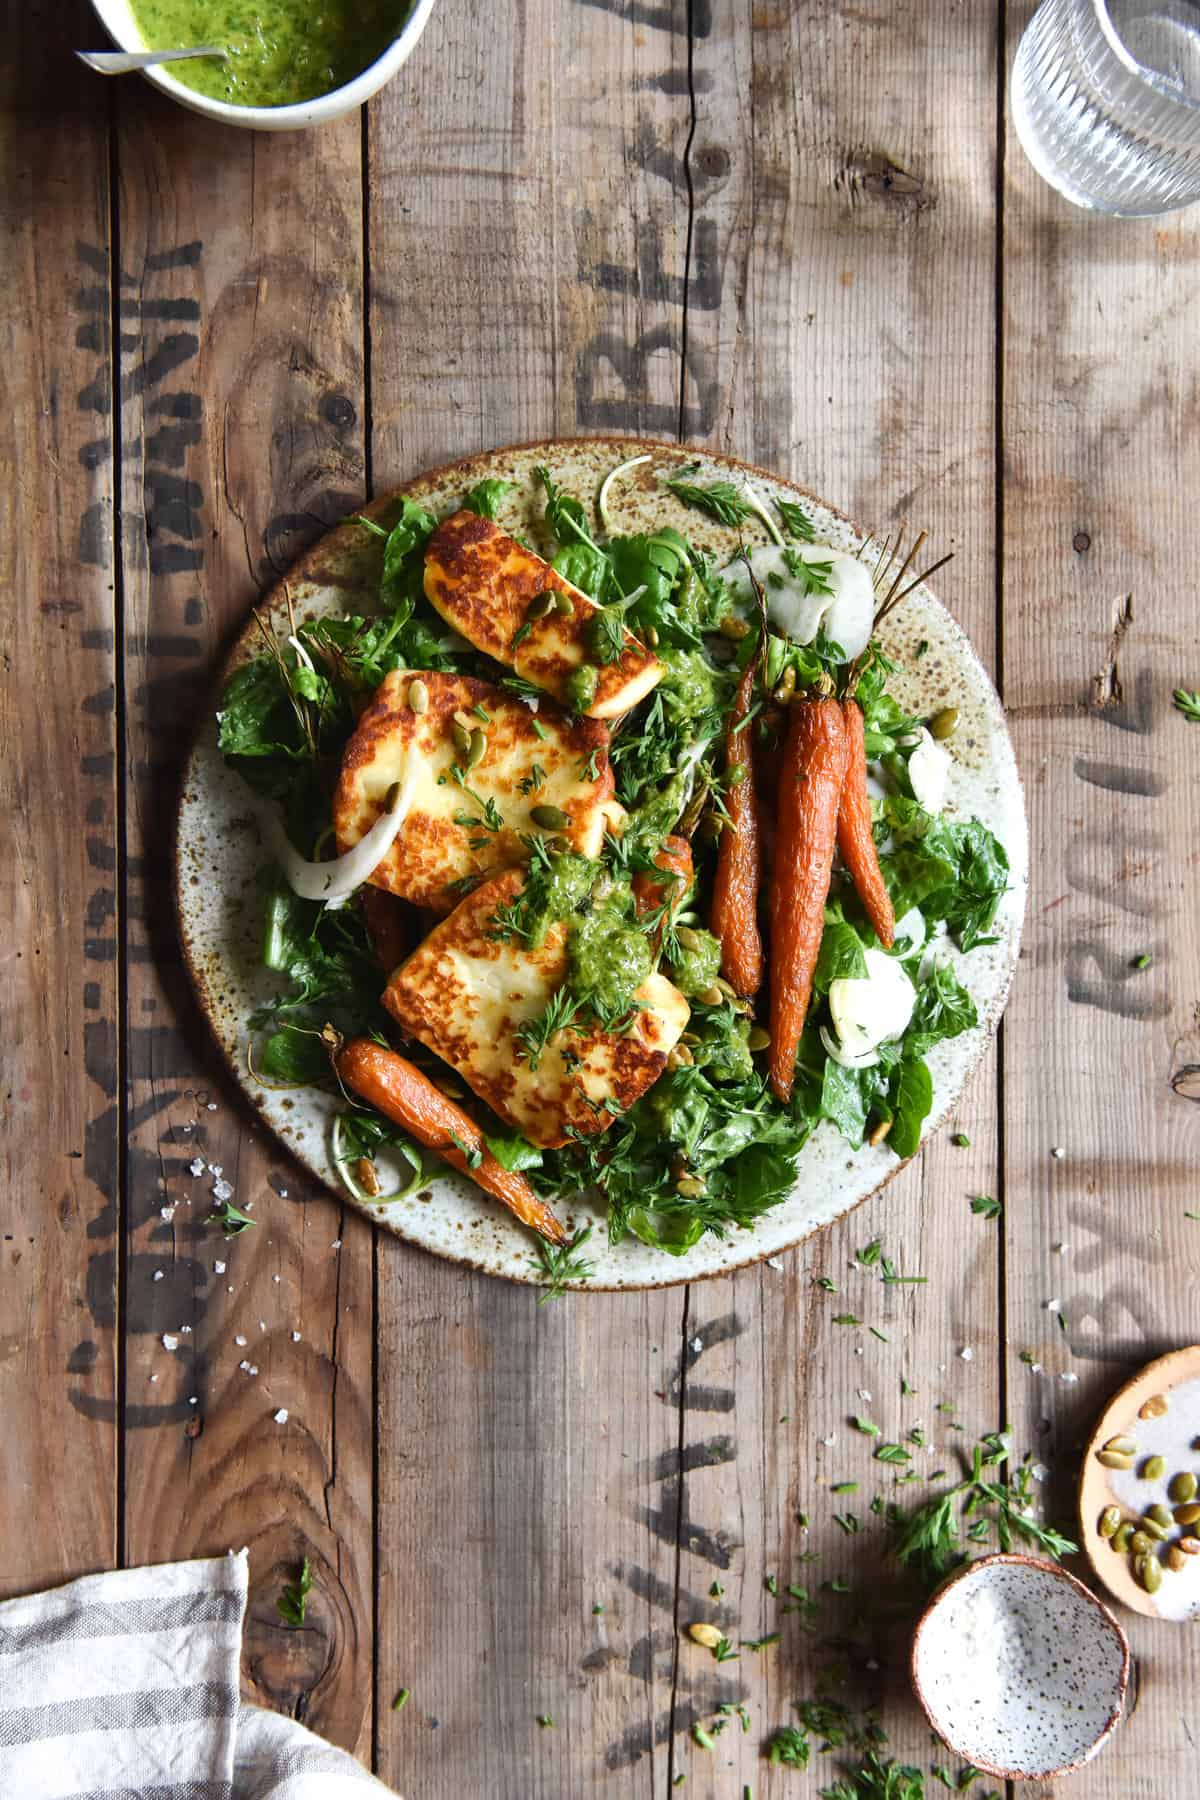 An aerial image of a roasted carrot salad with haloumi and green herb sauce on a wooden table. The salad sits in the centre of the image and is surrounded by scattered herbs, small pinch bowls and a beige linen tea towel.